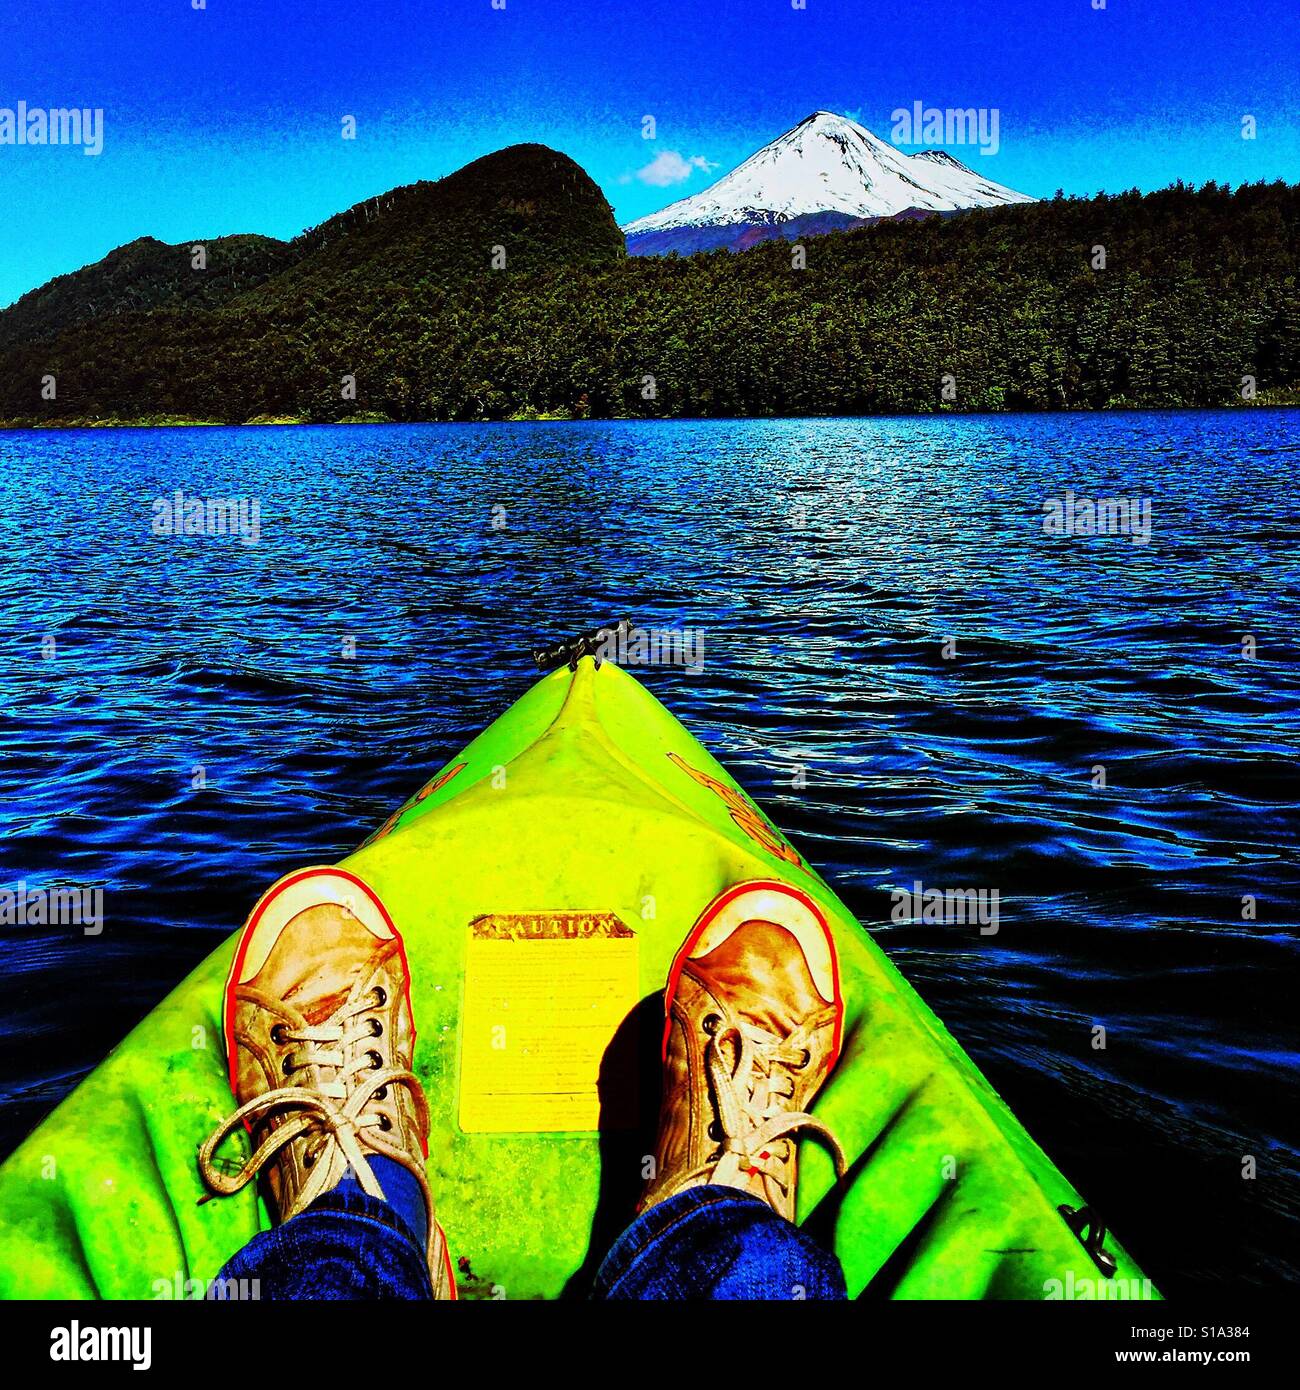 A canoeist's feet in the front section of a lime-green canoe in the foreground on a rippling lake, with a snow-capped volcano and native forest in the background. Stock Photo